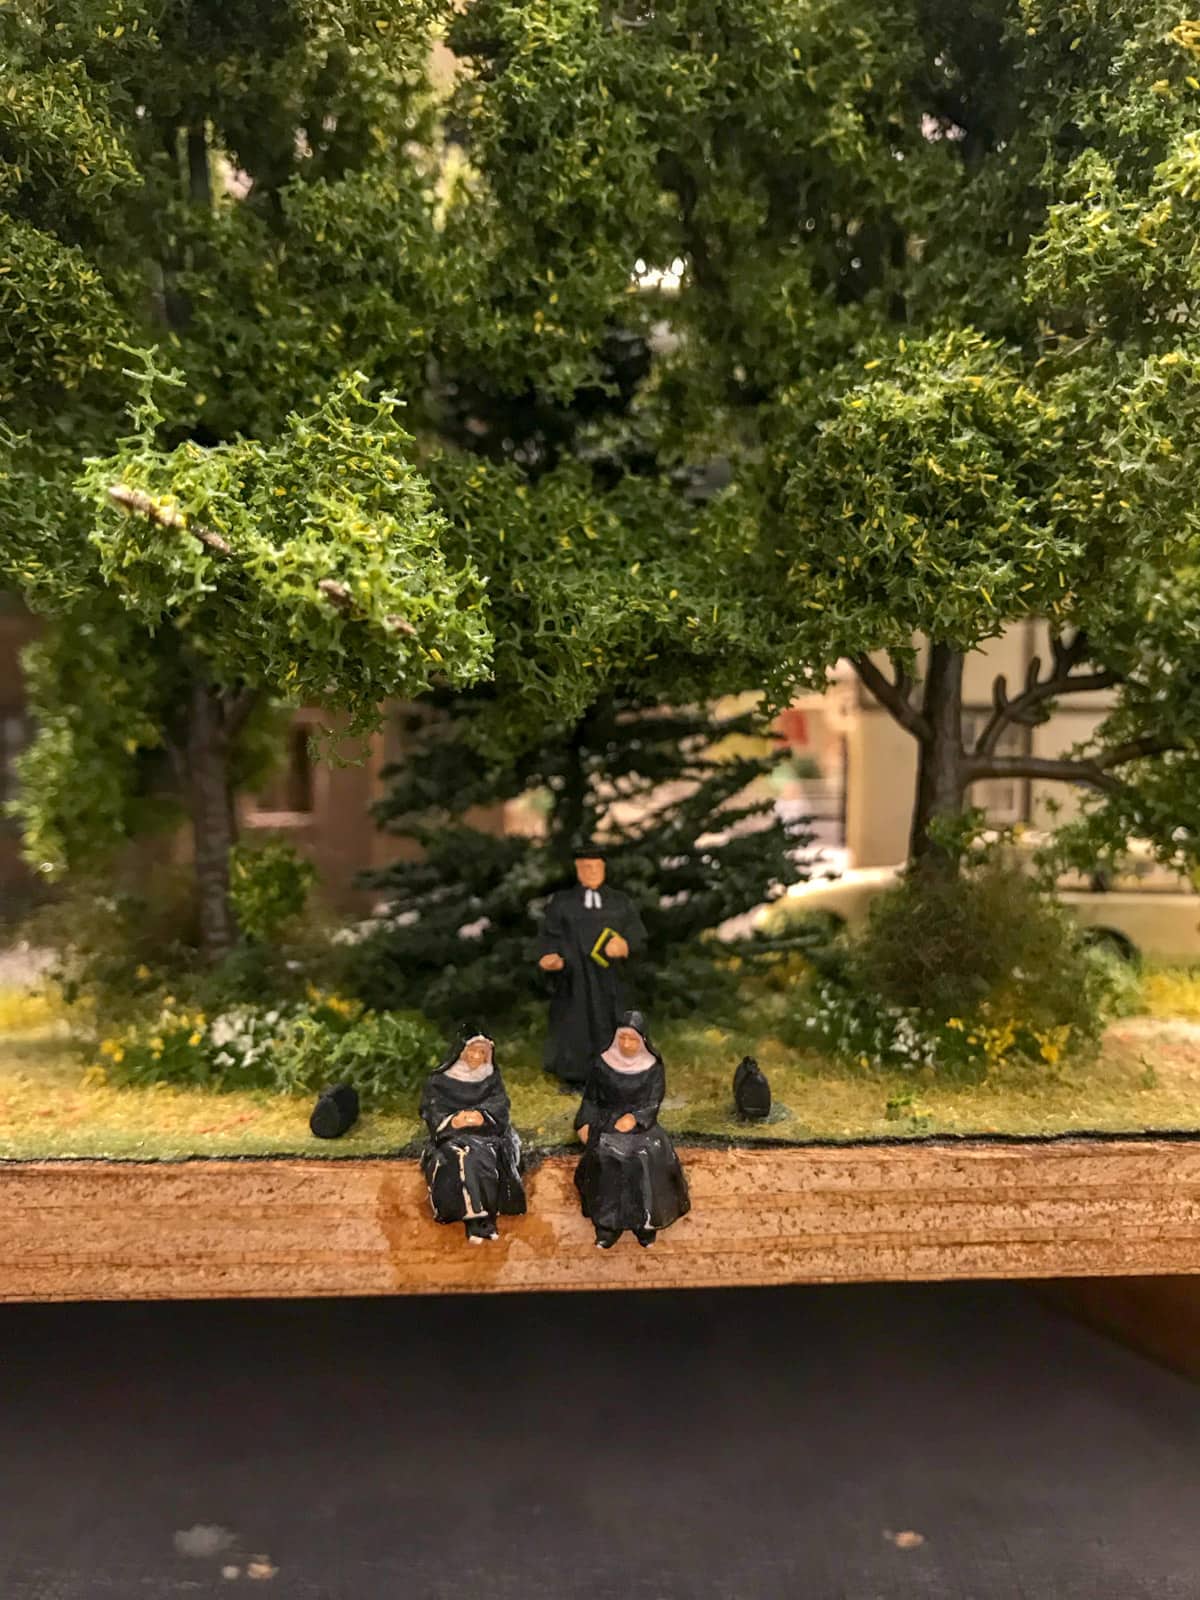 Two figurines of nuns sitting at the edge of a landscape. Behind them is a figurine man dressed in black. There are trees behind them as well